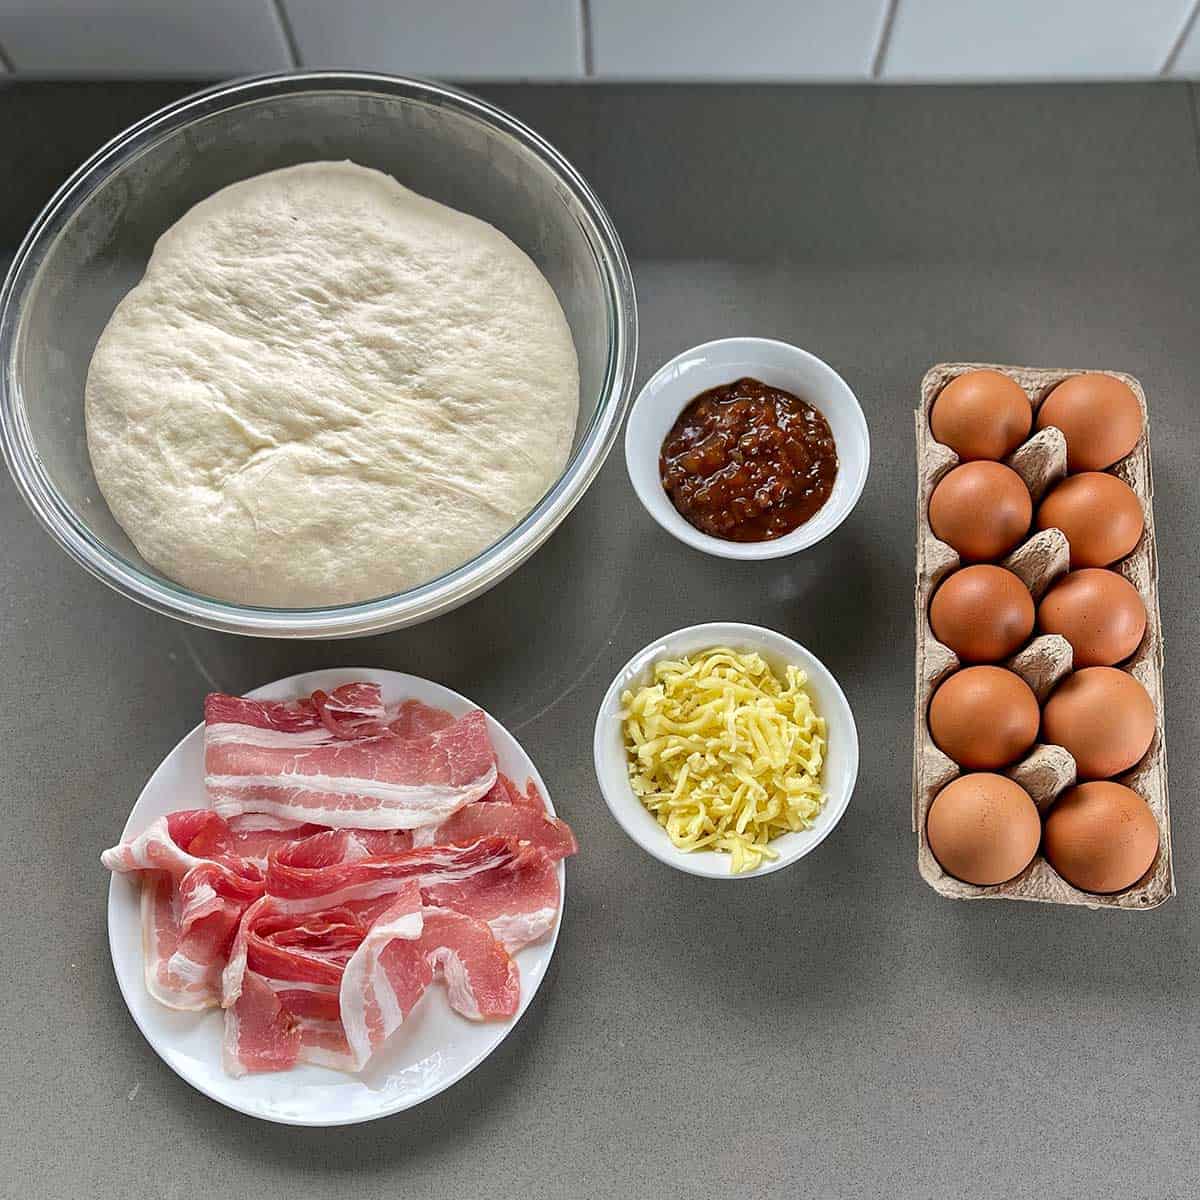 The ingredients for Breakfast Pizza Slab sitting on a grey bench.